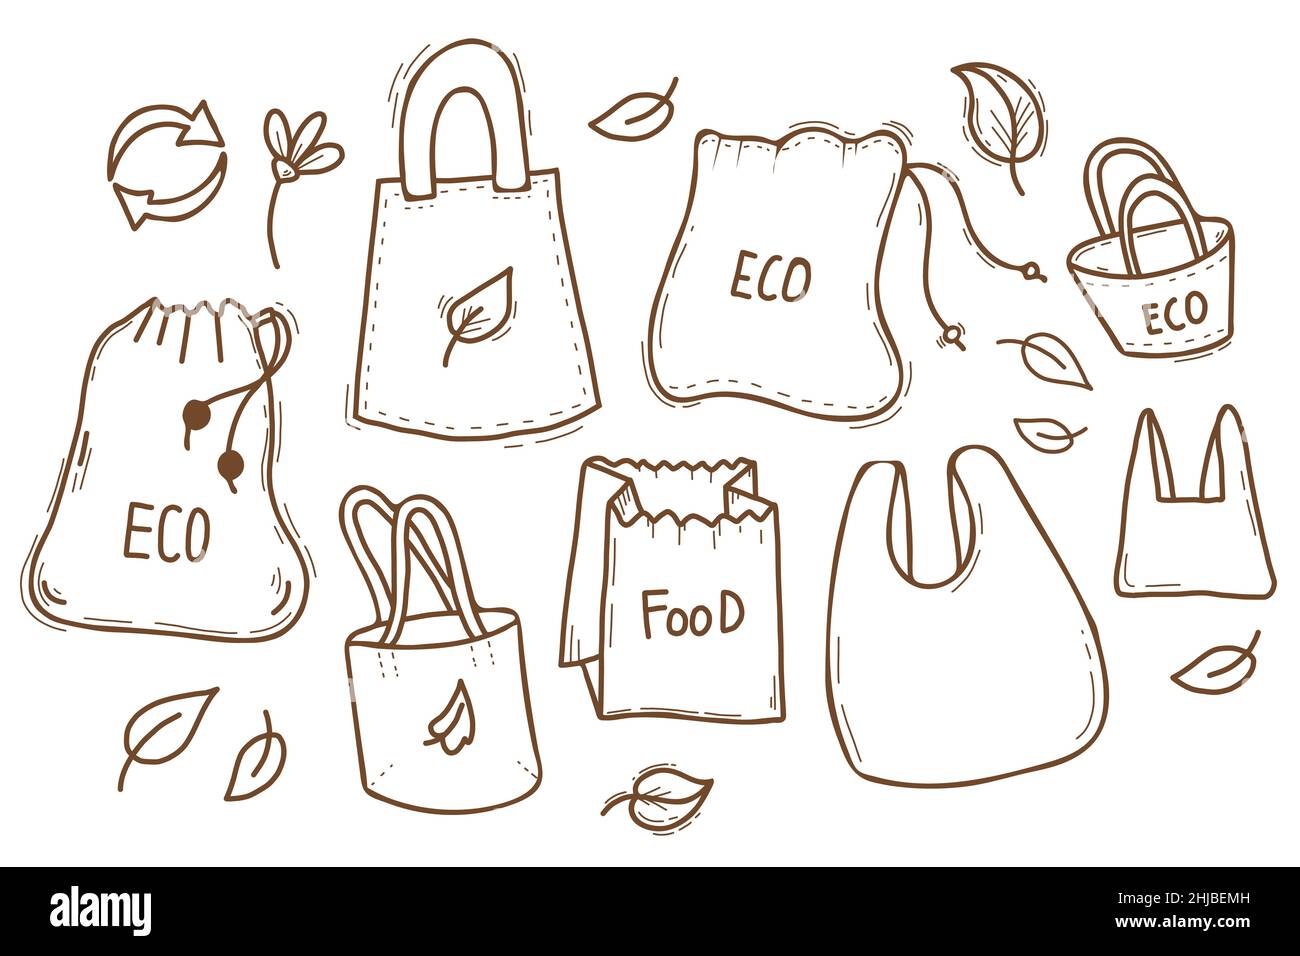 https://c8.alamy.com/comp/2HJBEMH/ecology-concept-no-plastic-and-organics-set-of-friendly-natural-eco-bags-and-paper-bags-for-groceries-vector-illustration-linear-hand-drawings-in-d-2HJBEMH.jpg